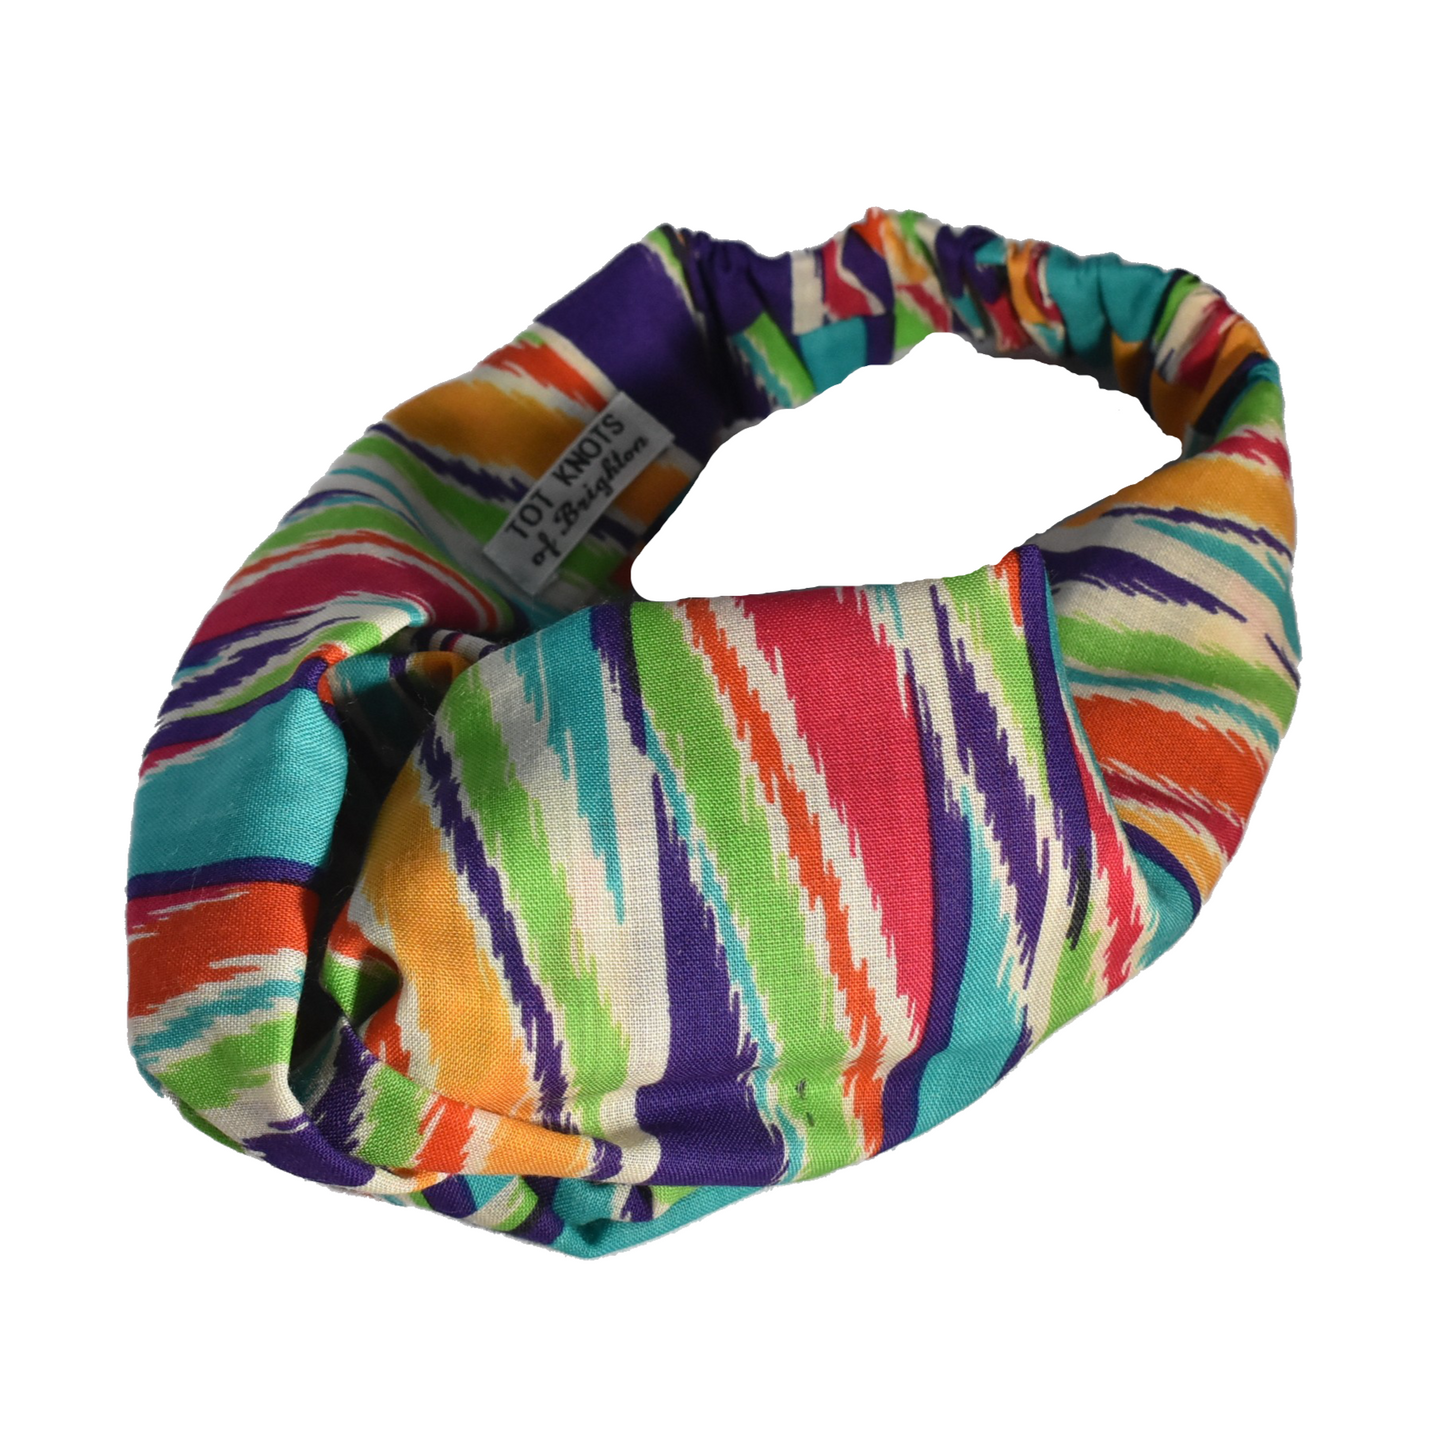 Twisted Turban hairband - Vintage Liberty of London Bright Multicolour Ikat Graphic in Varuna wool